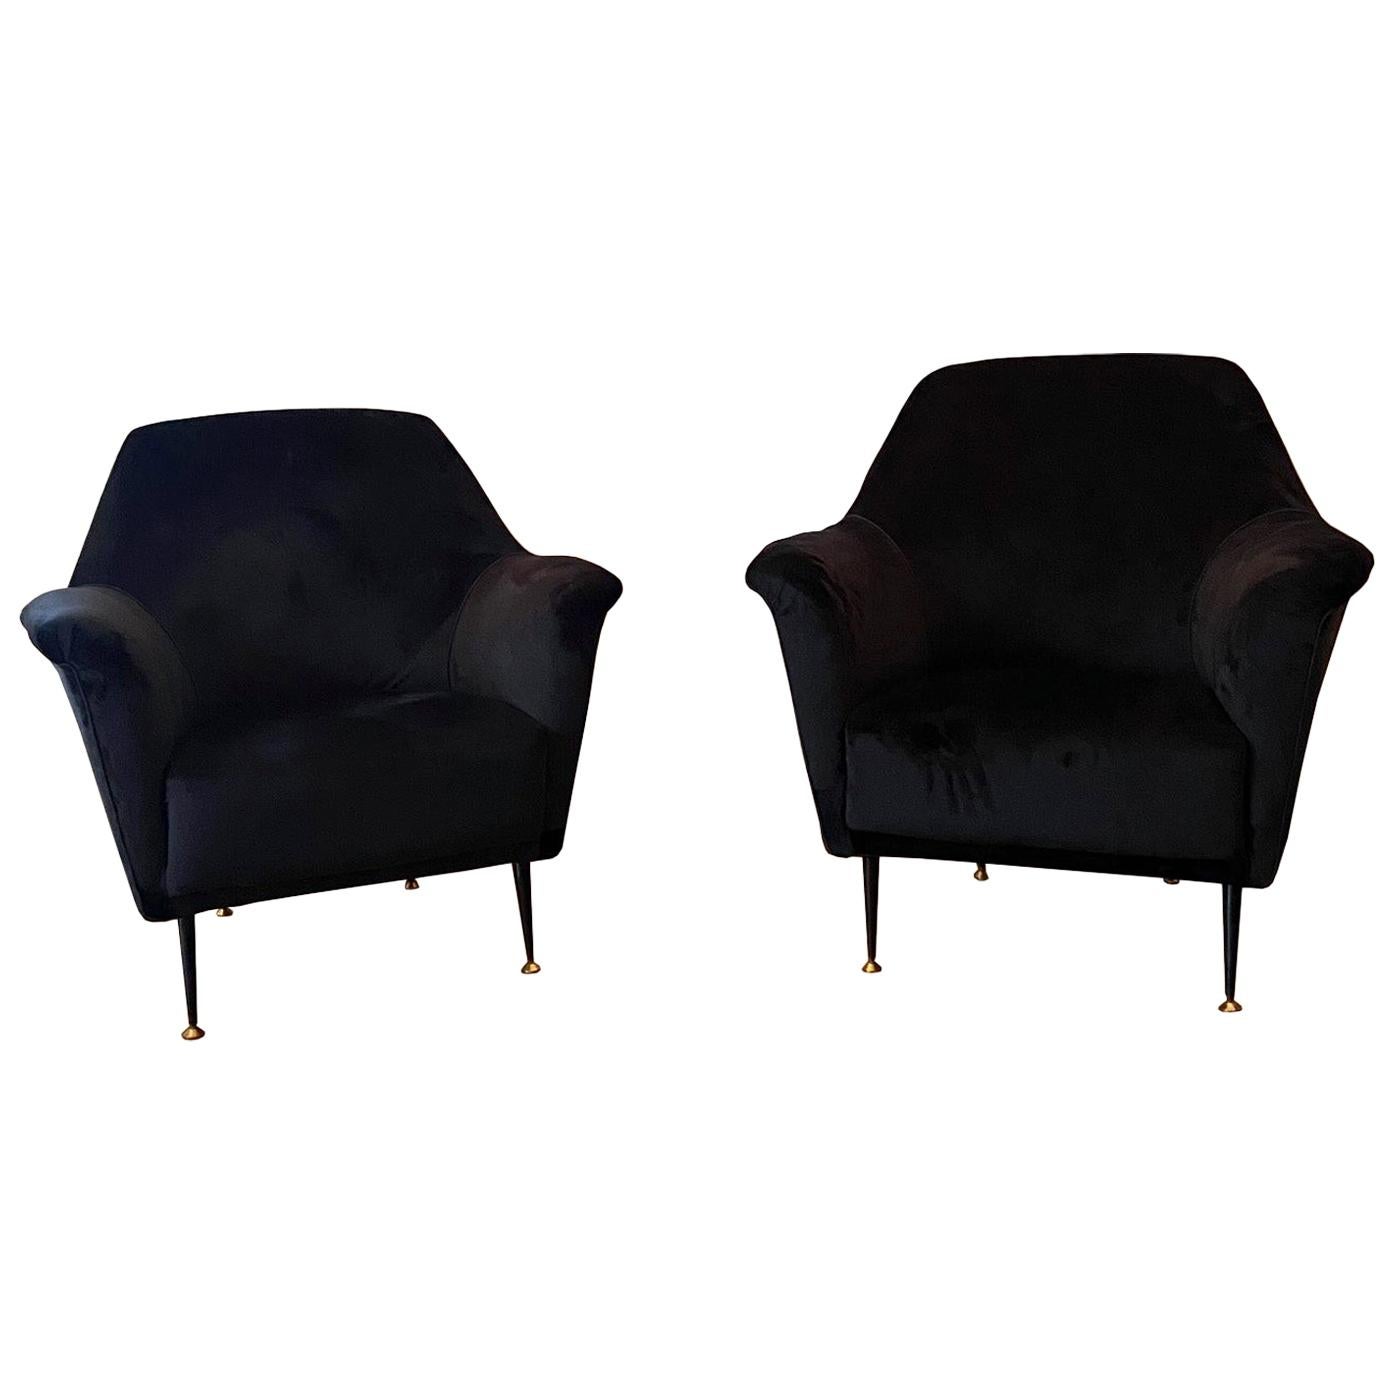 Pair of Lounge Chairs by ISA Bergamo, Italy, 1960s